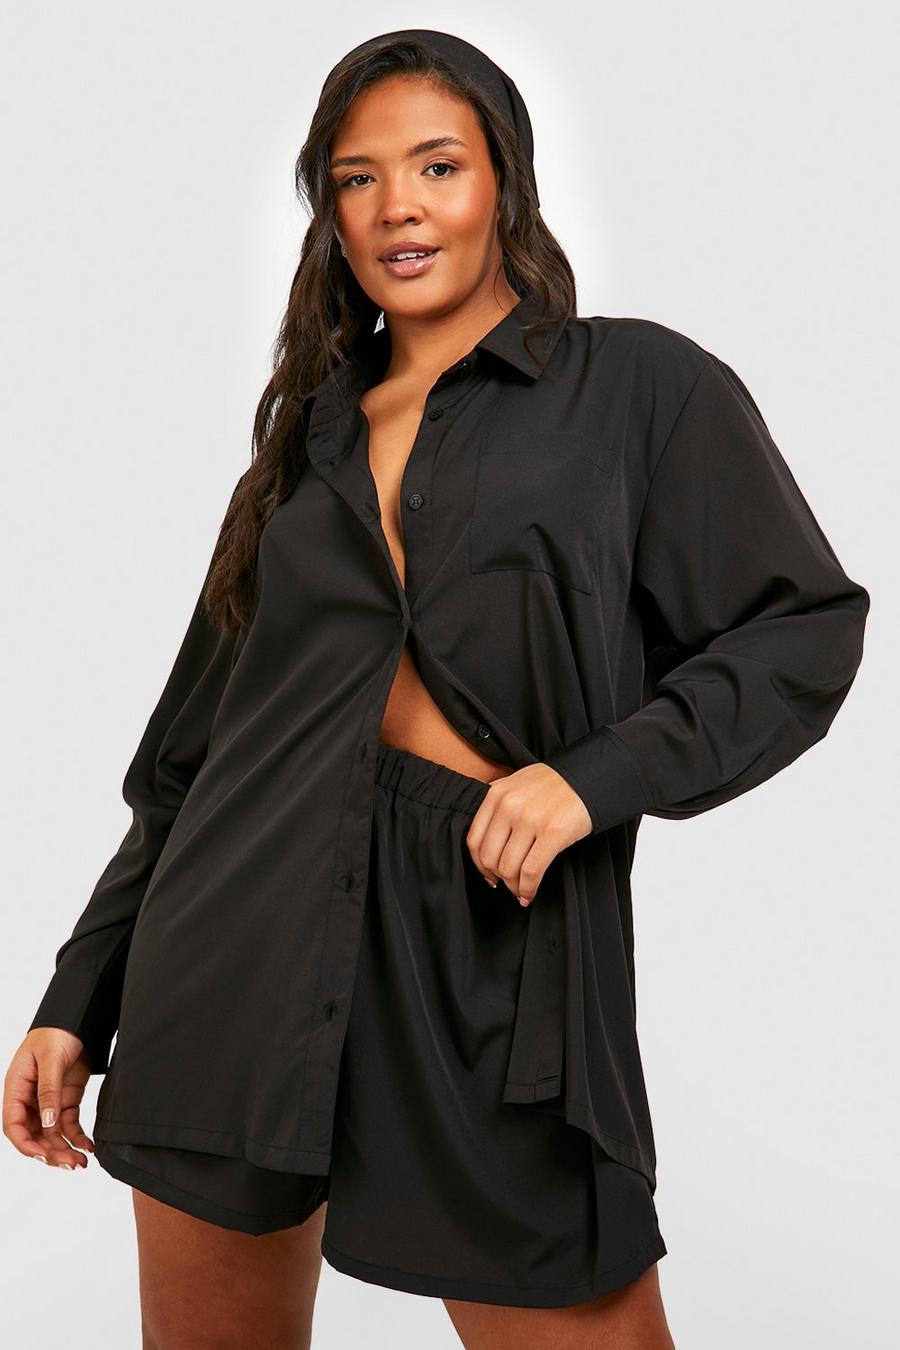 Black Plus Shirt & Shorts Co-ord With Headscarf